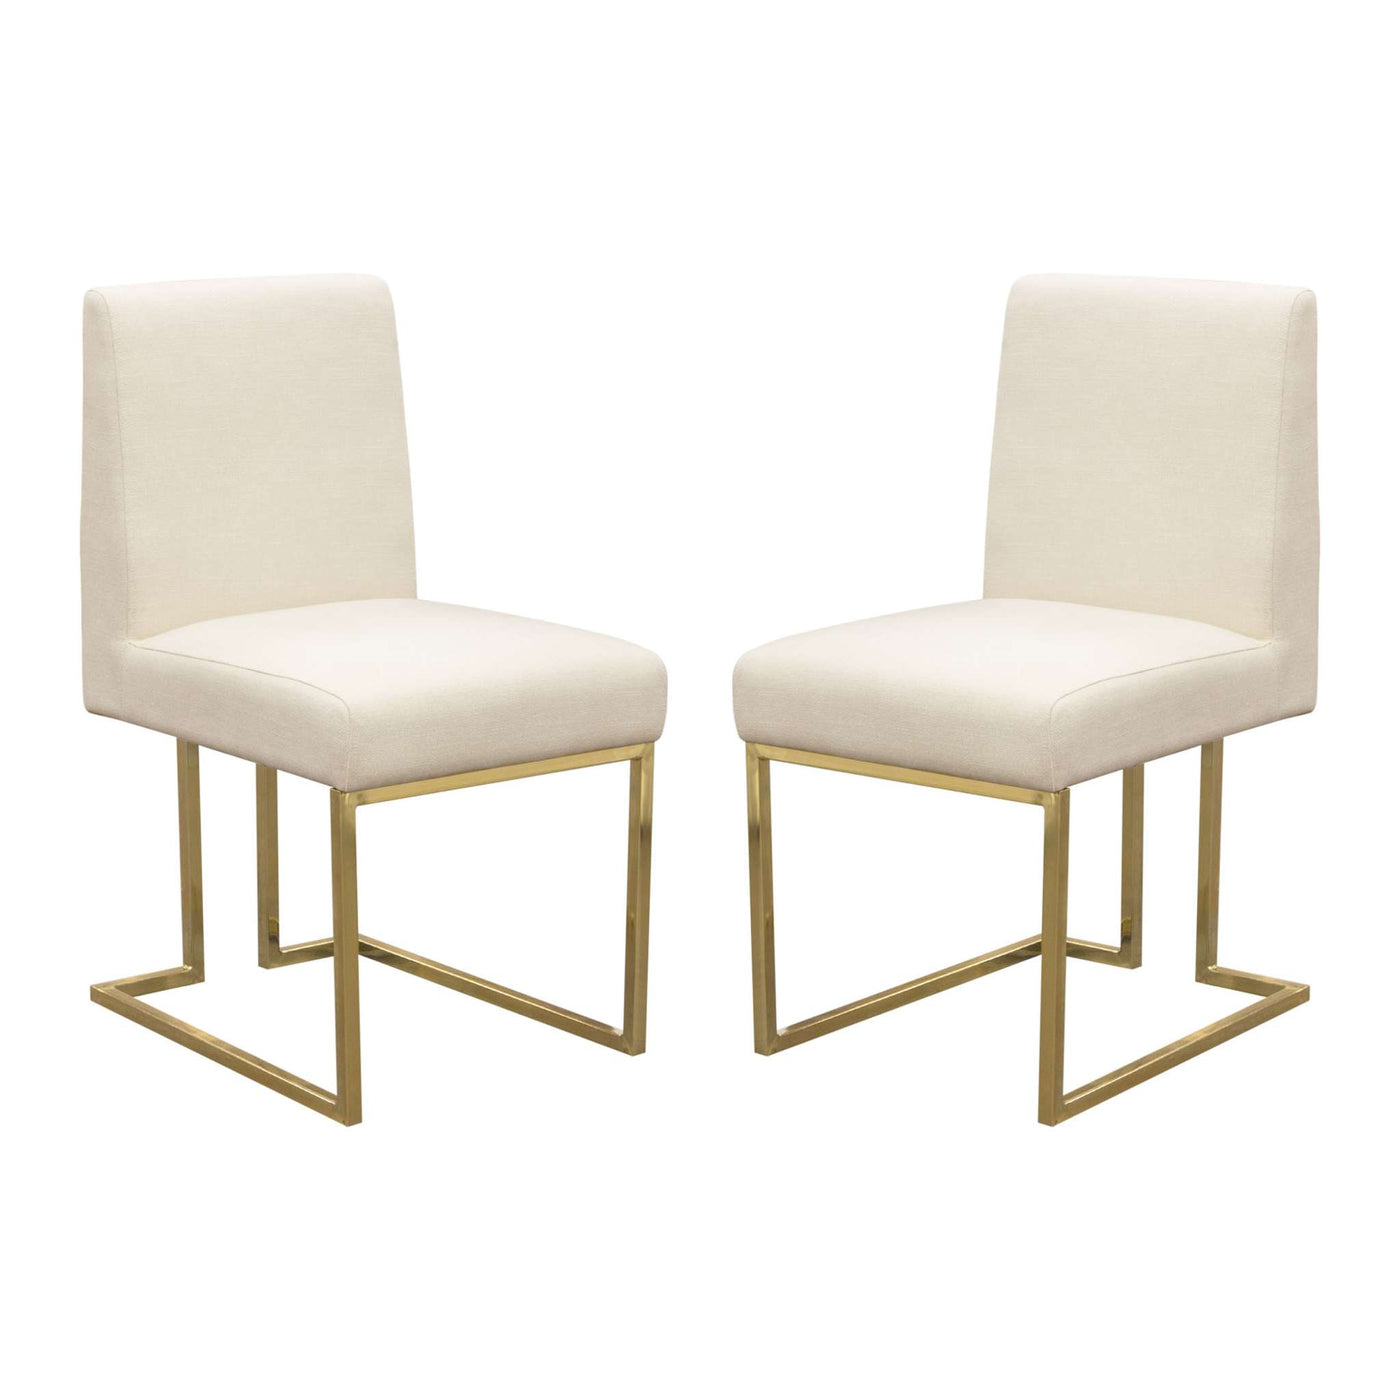 Set of (2) Skyline Dining Chairs in Cream Fabric w/ Polished Gold Metal Frame by Diamond Sofa